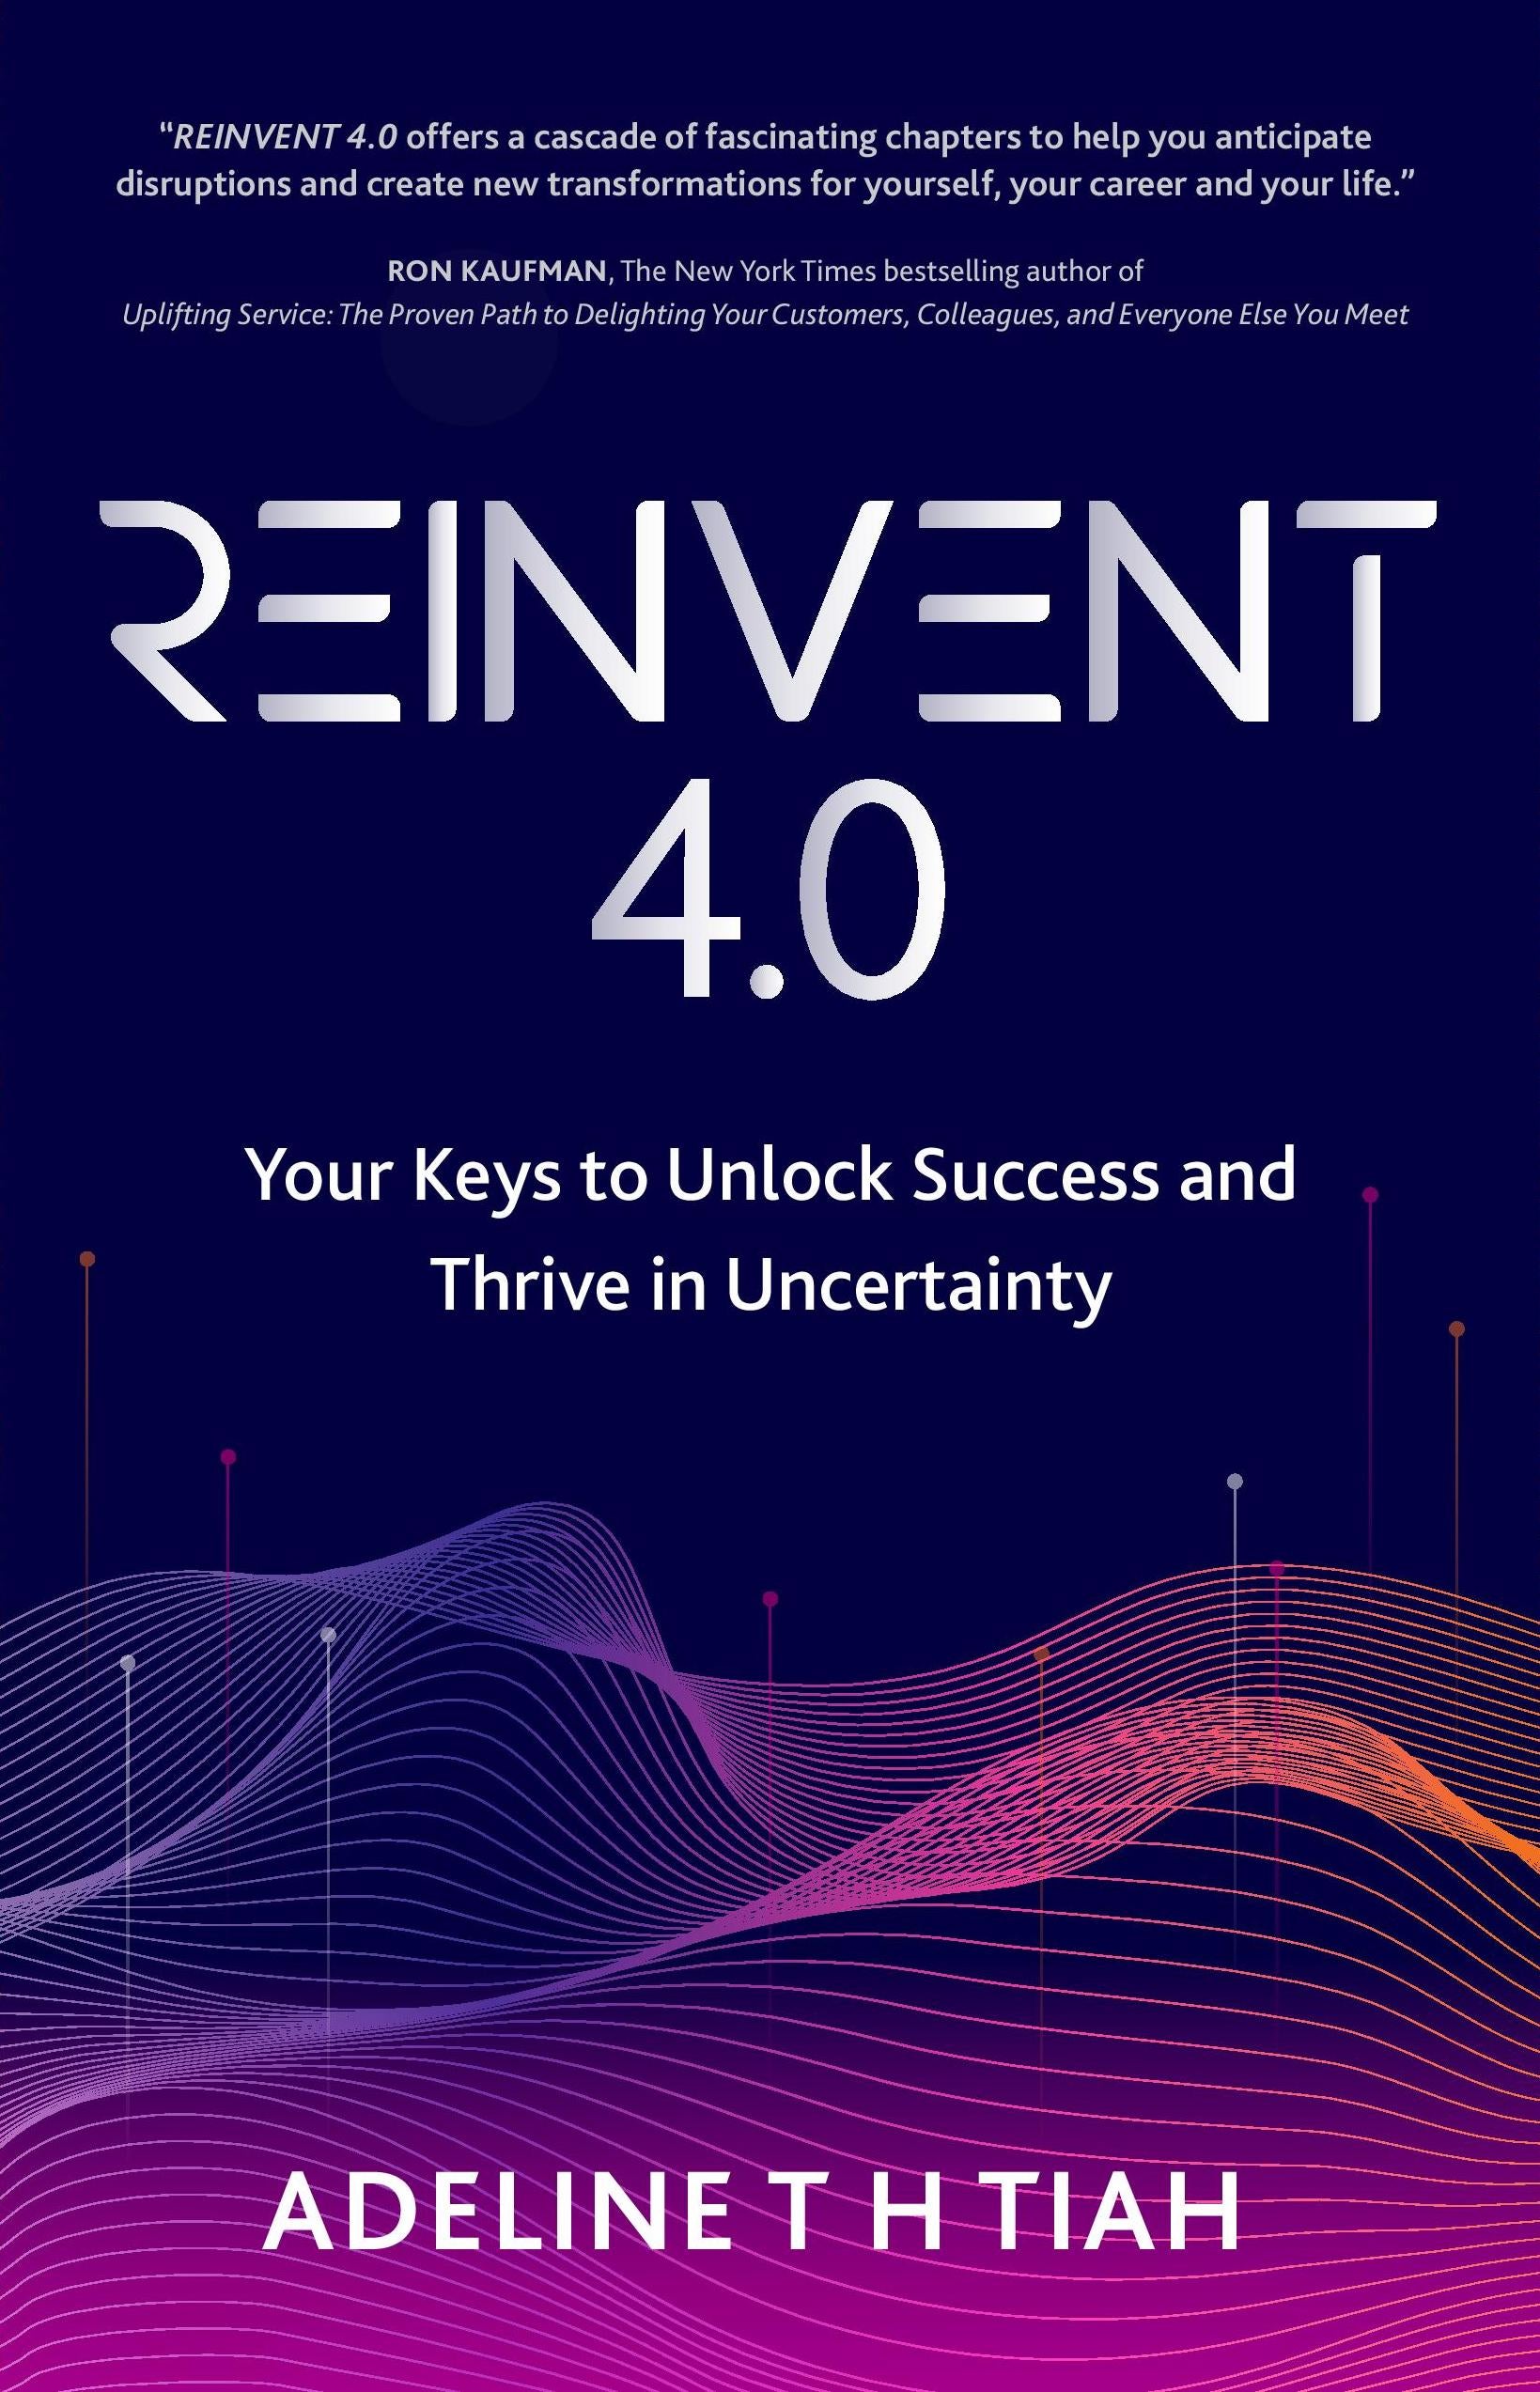 Reinvent 4.0: Your Keys to Unlock Success and Thrive in Uncertainty